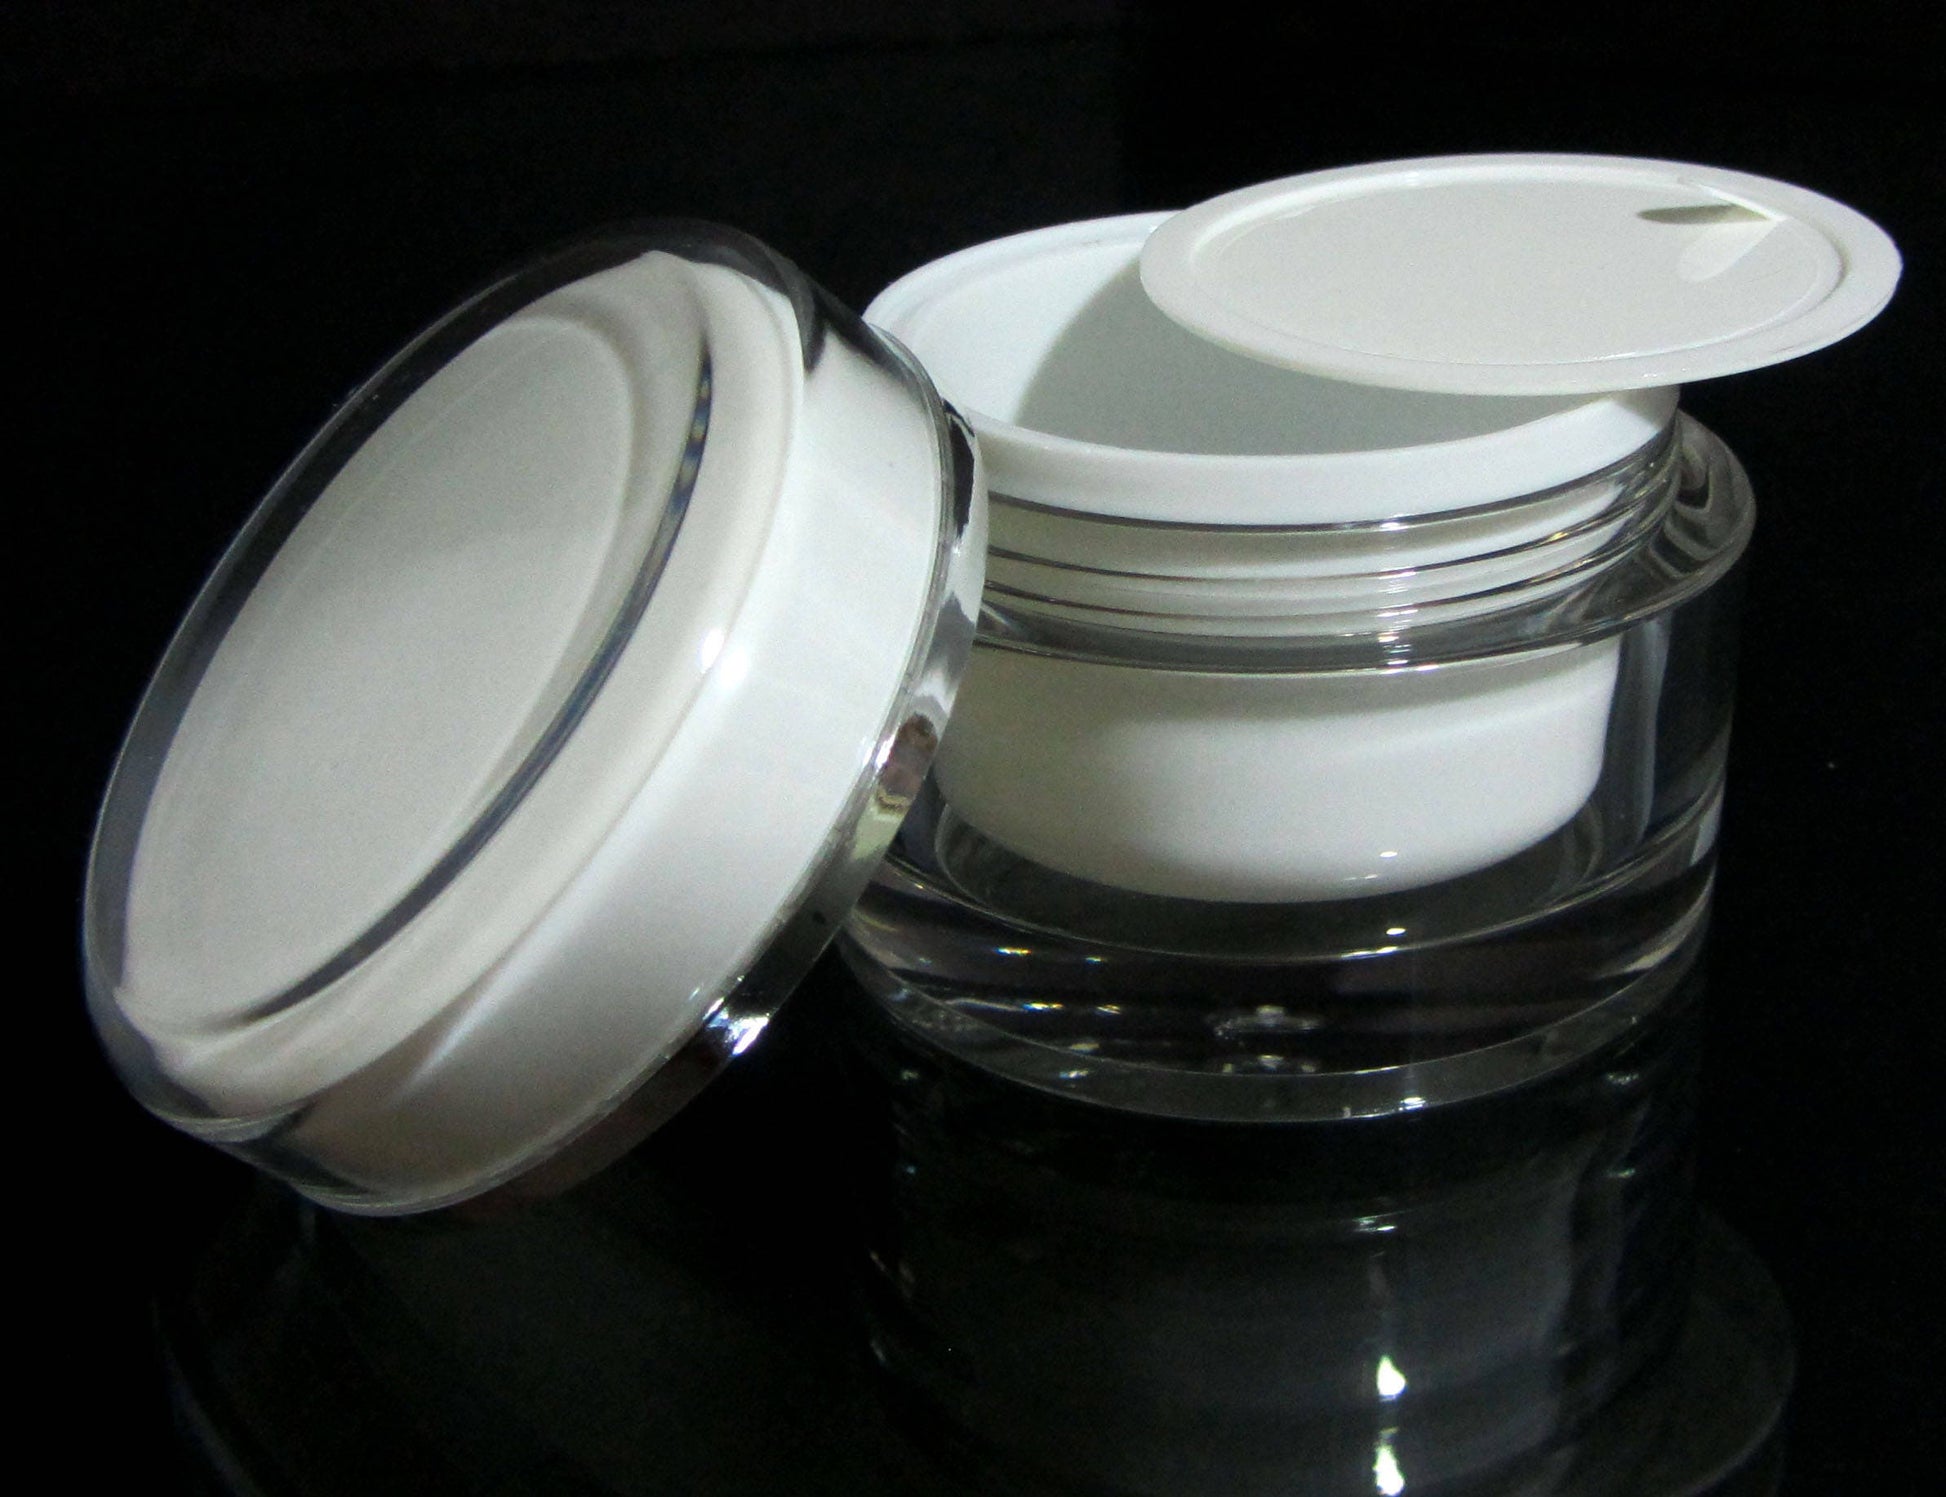 5 Acrylic Cosmetic Cream Jar Elegant Beauty Containers w/ Sealing Disc 50 ML (3150-5) Discount Cosmetic Jars